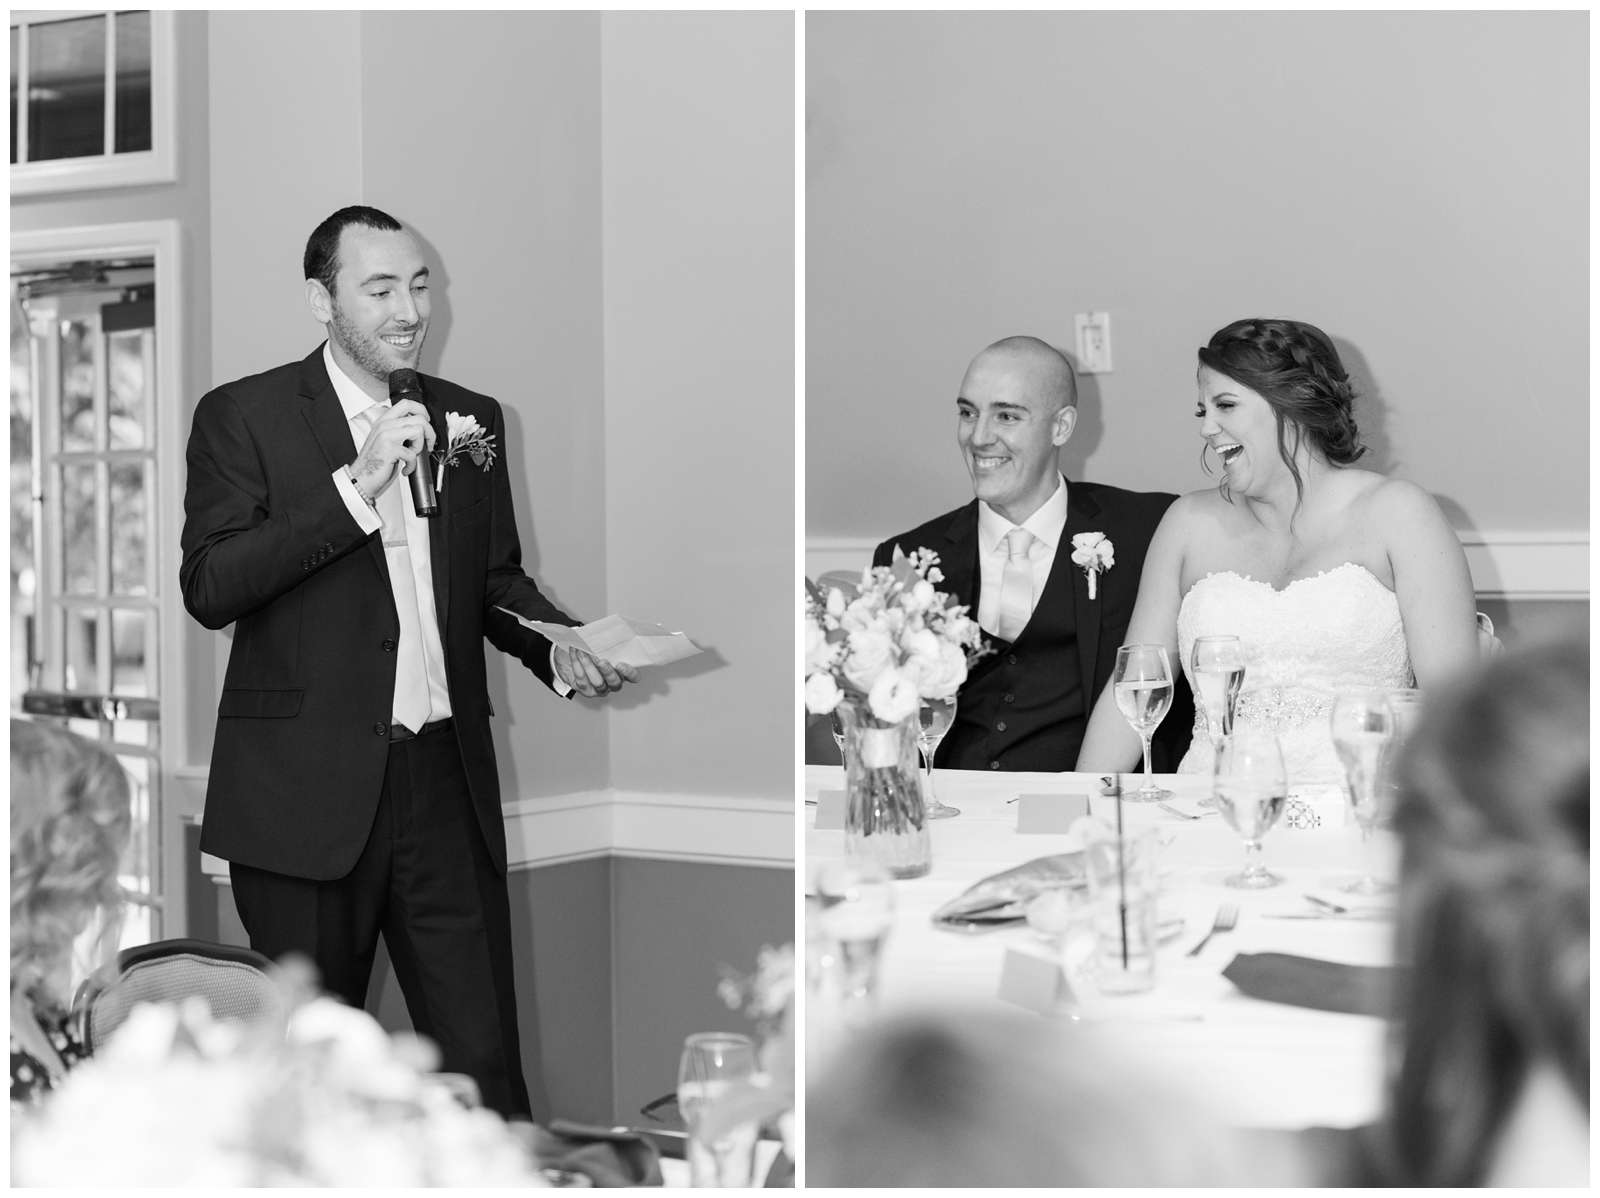 groomsman toasts bride and groom during wedding reception while bride laughs